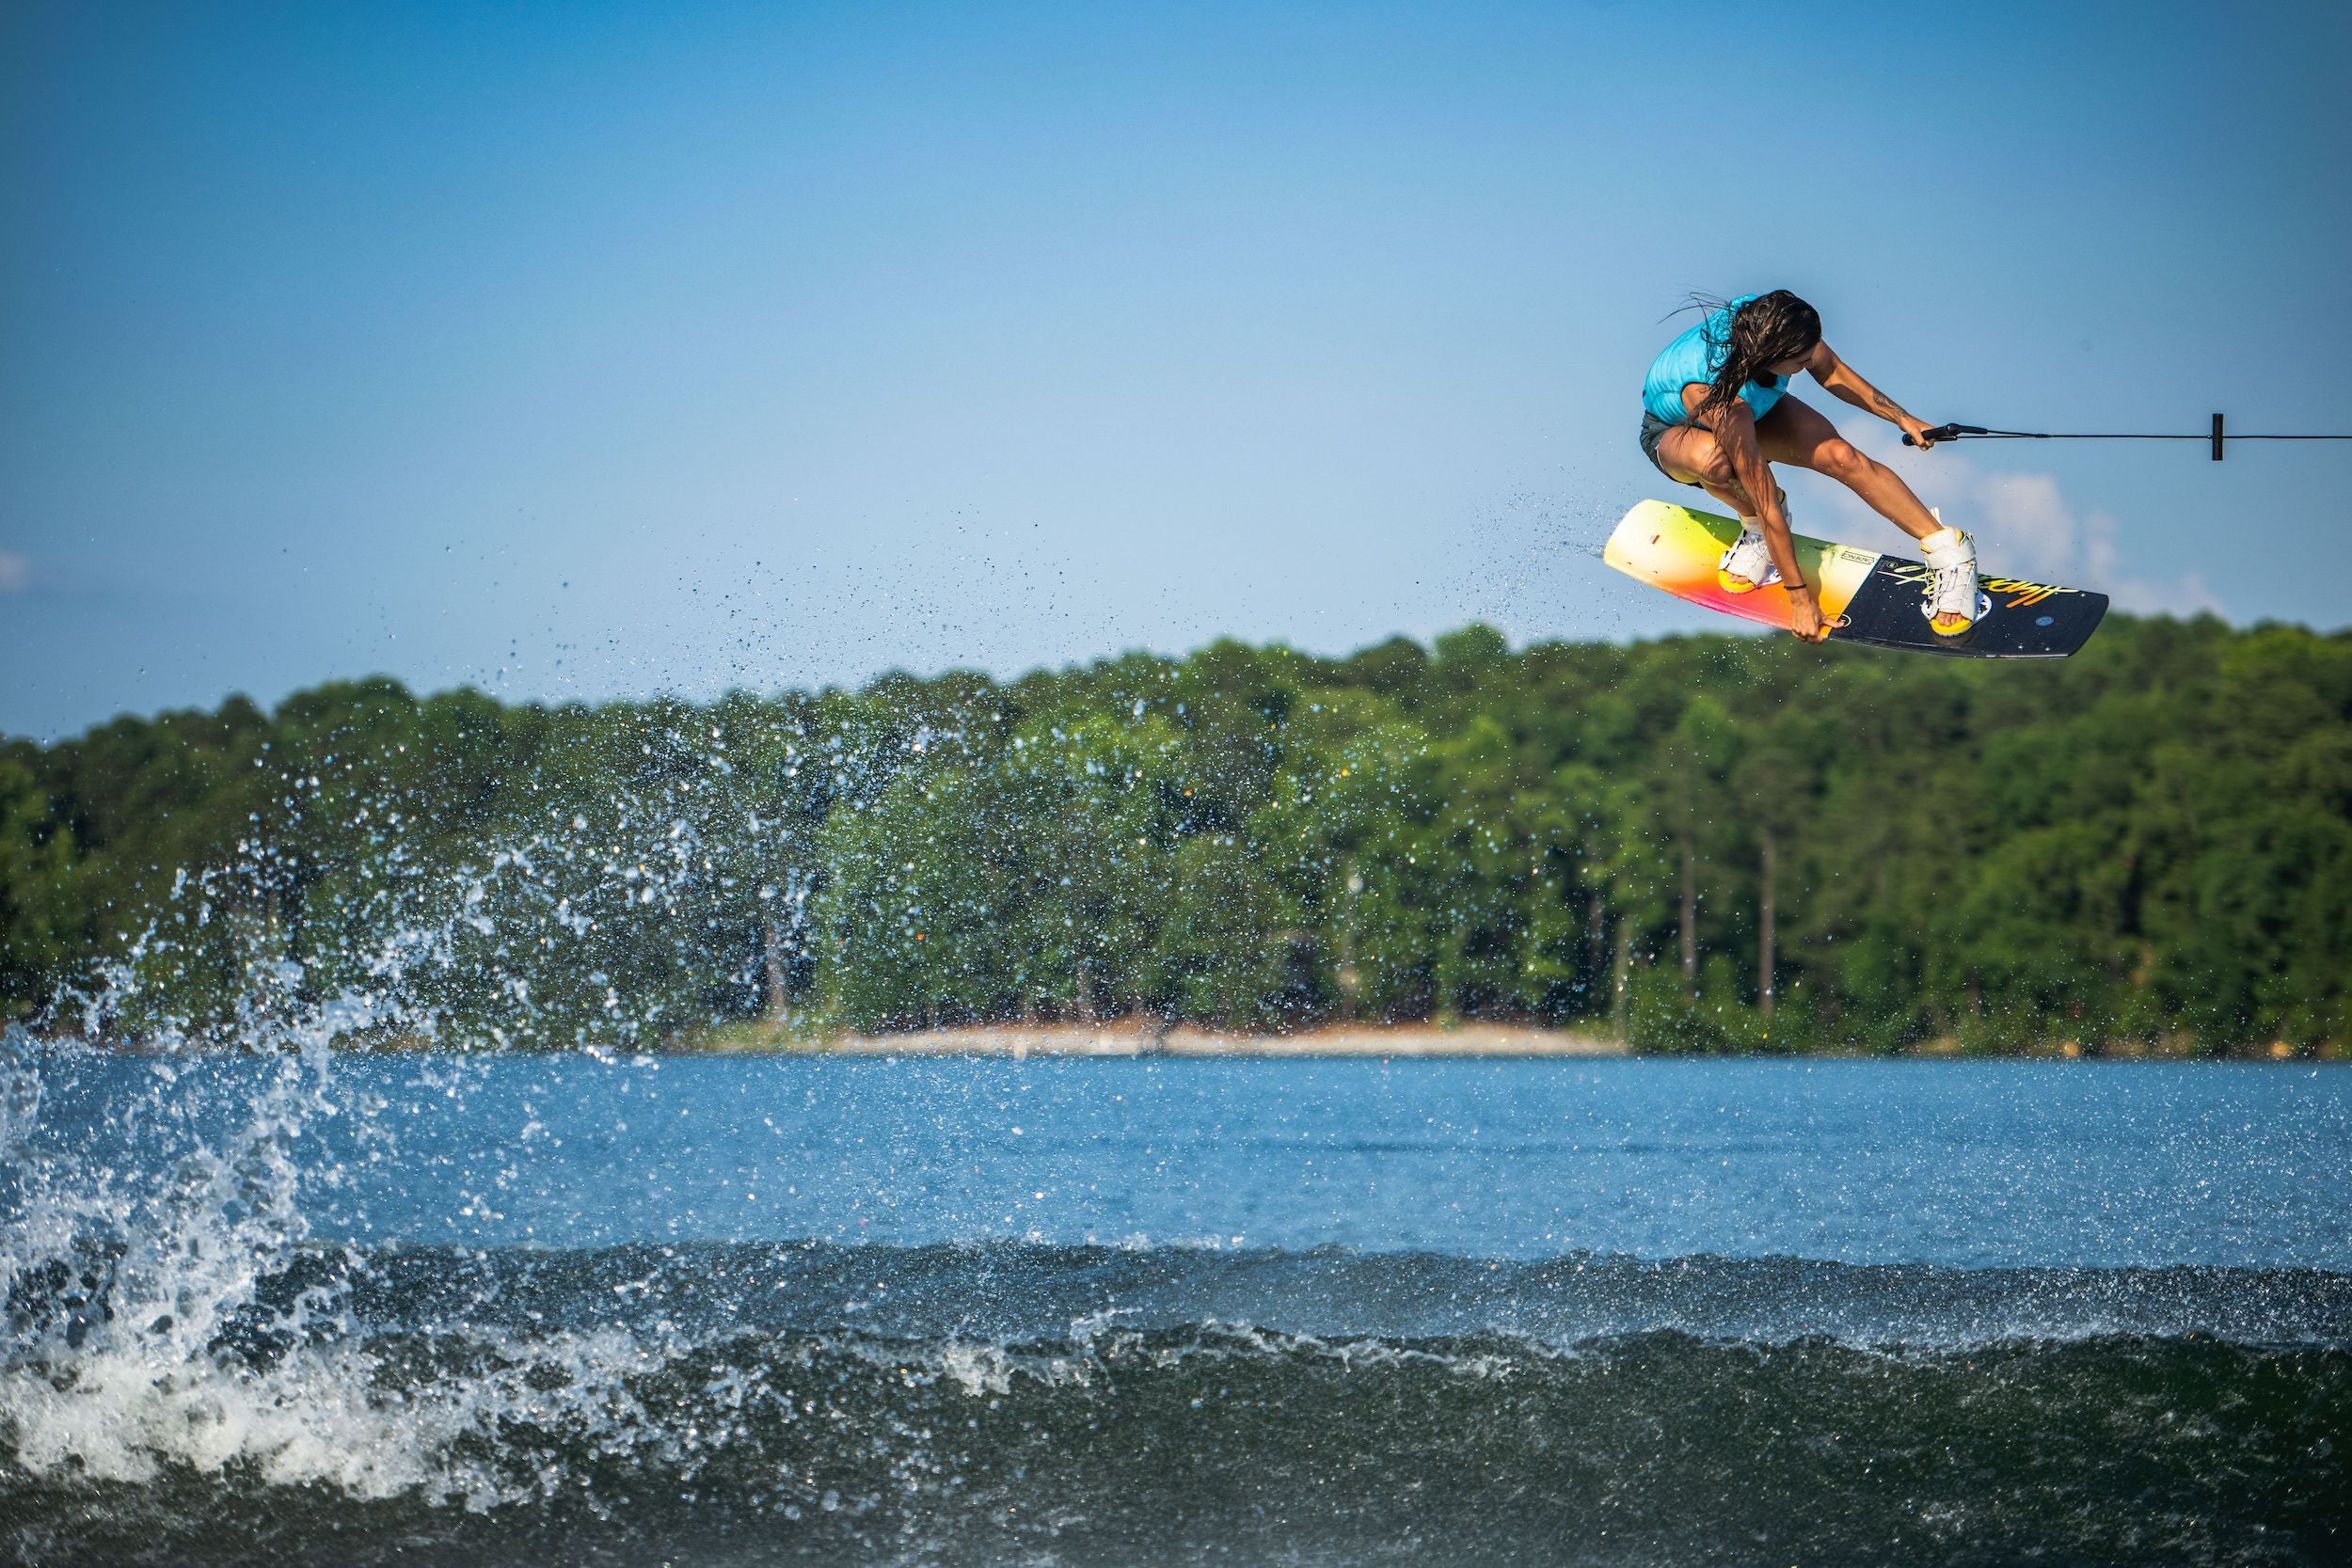 A woman is riding a wakeboard in the water, showcasing the Hyperlite 2023 Cadence Wakeboard from Hyperlite's Cadence series with Satin Flex technology.